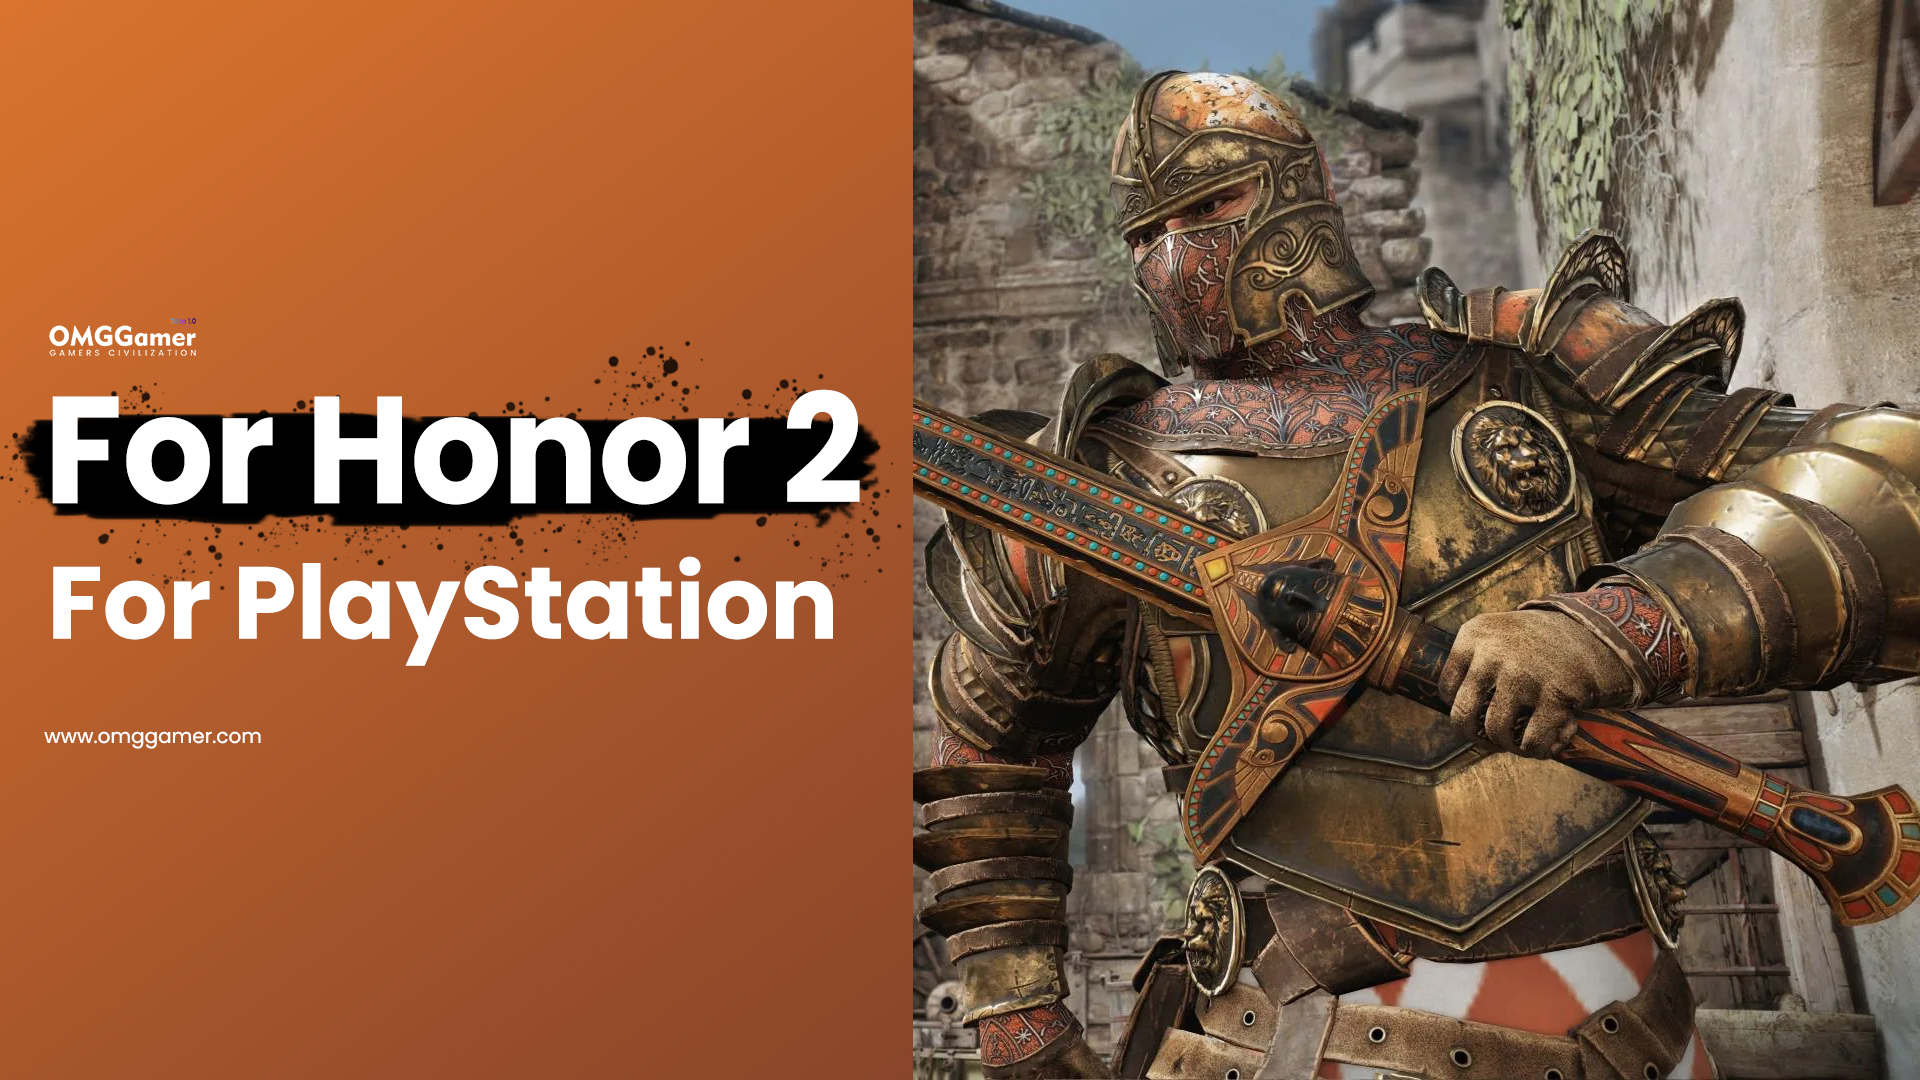 For Honor 2 for PlayStation